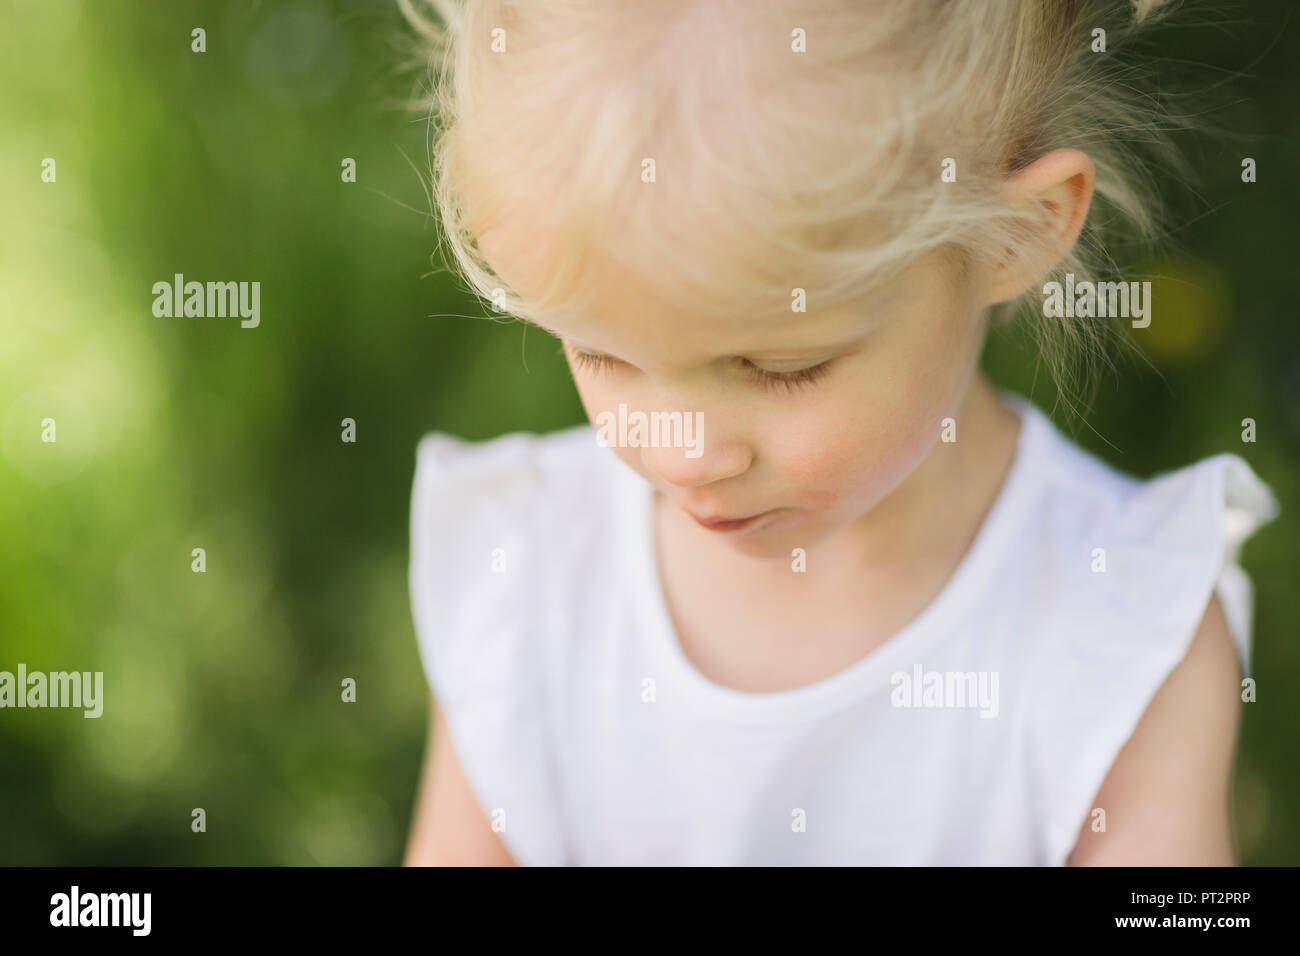 Blond little girl looking down Stock Photo